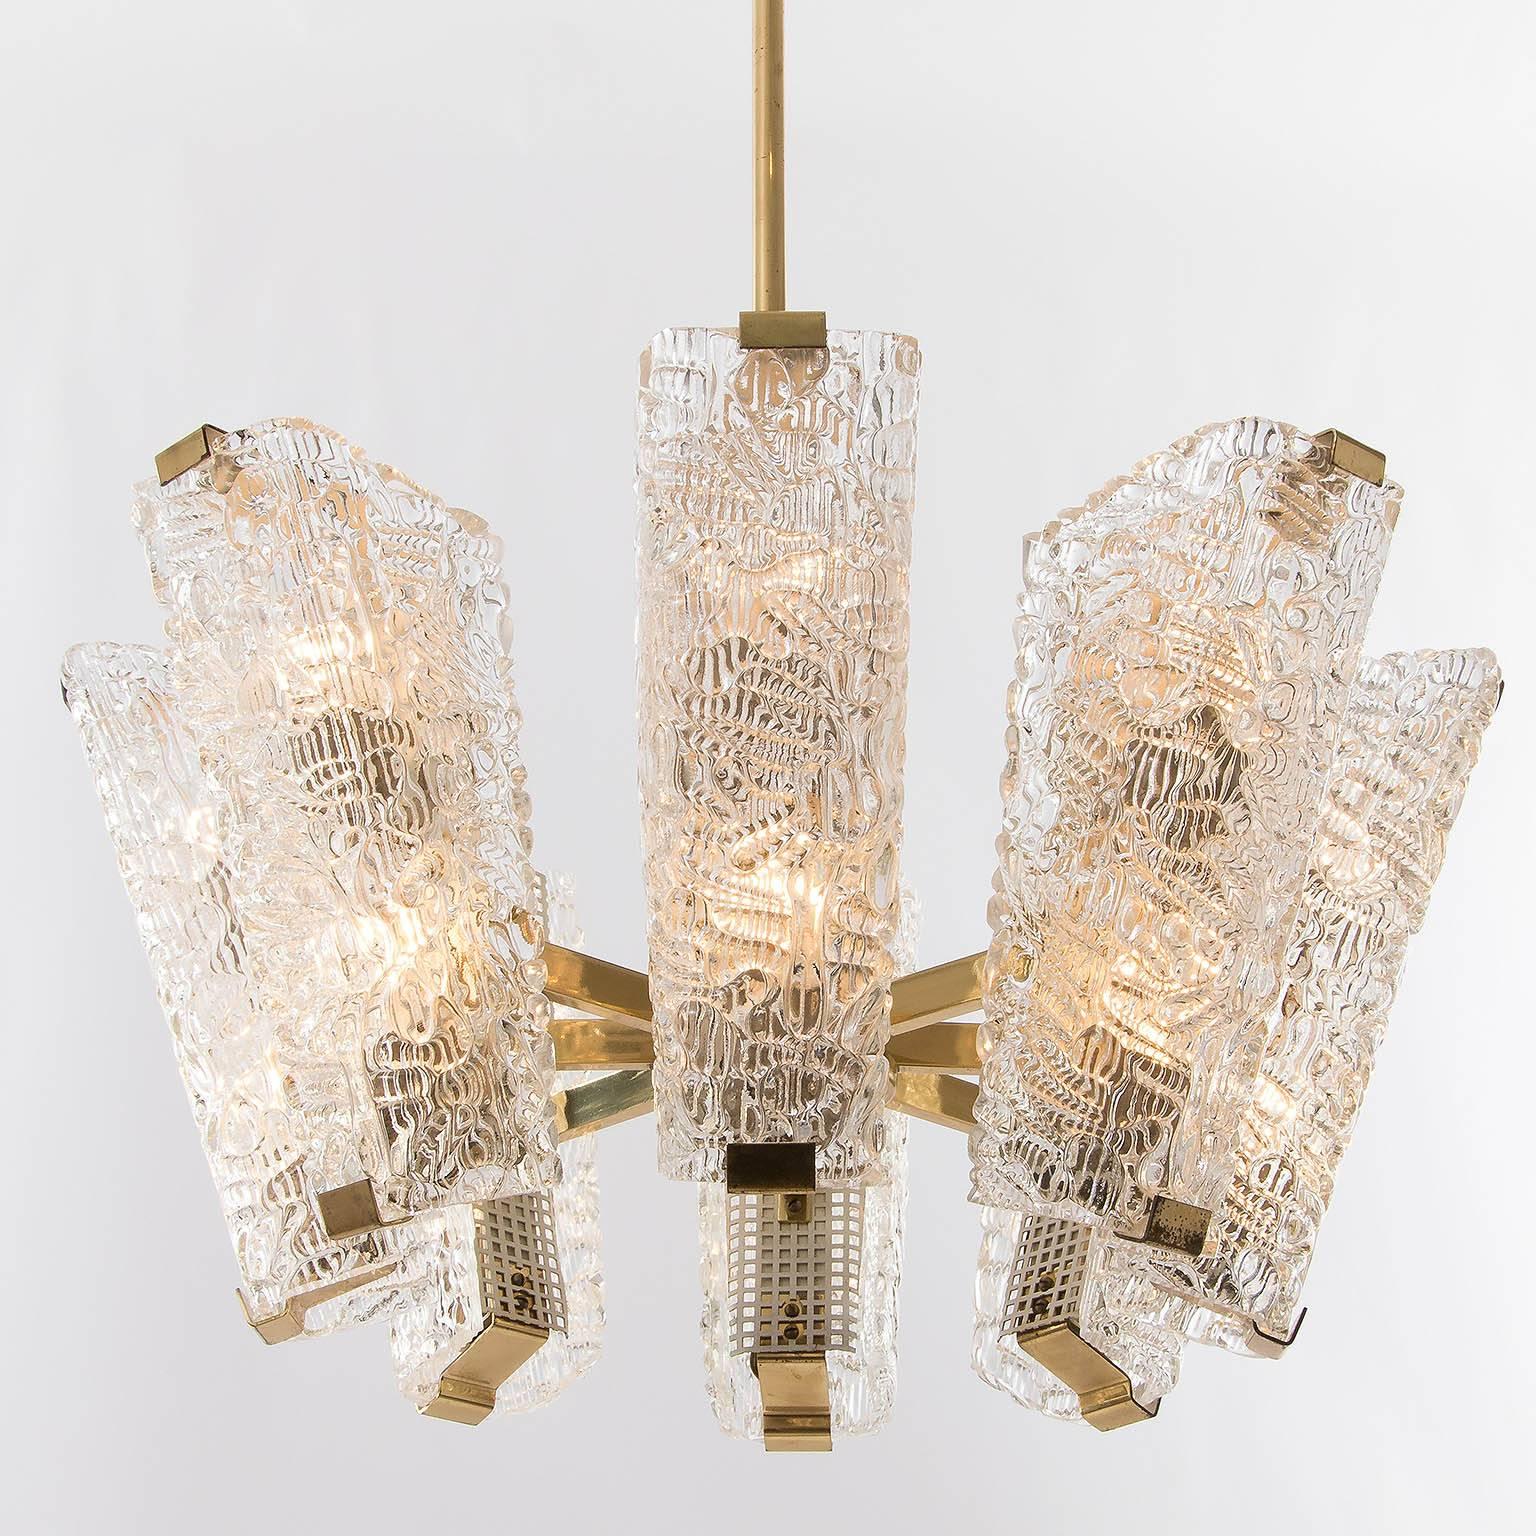 Large Kalmar Chandelier, Brass and Textured Glass, 1950s For Sale 1